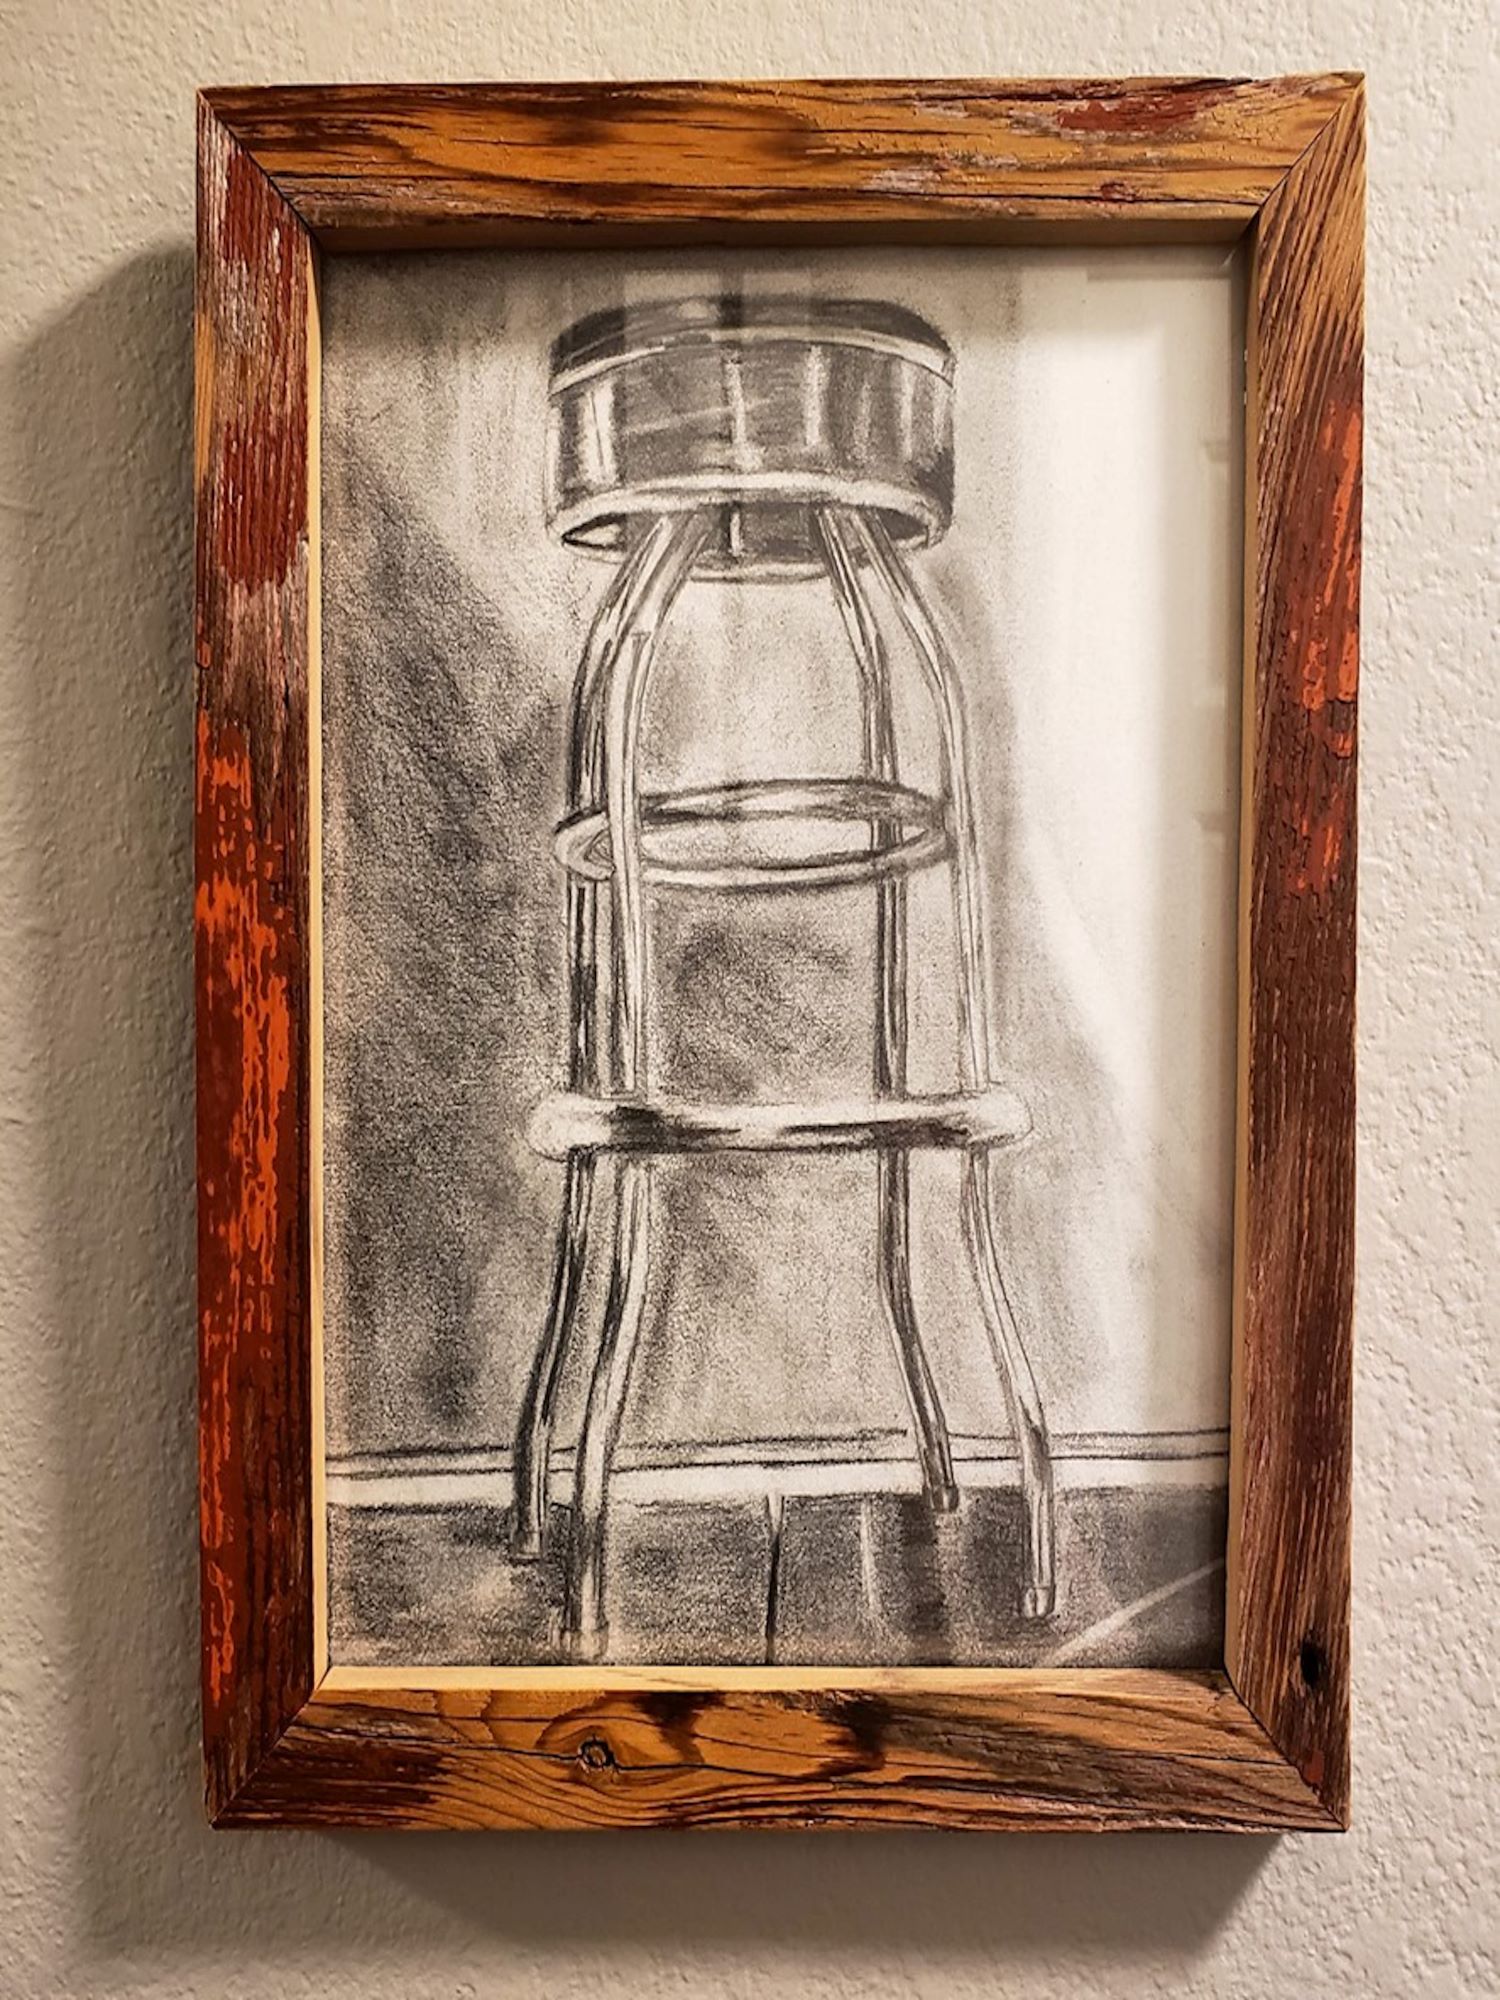 The drawing of a stool in a red barnwood frame